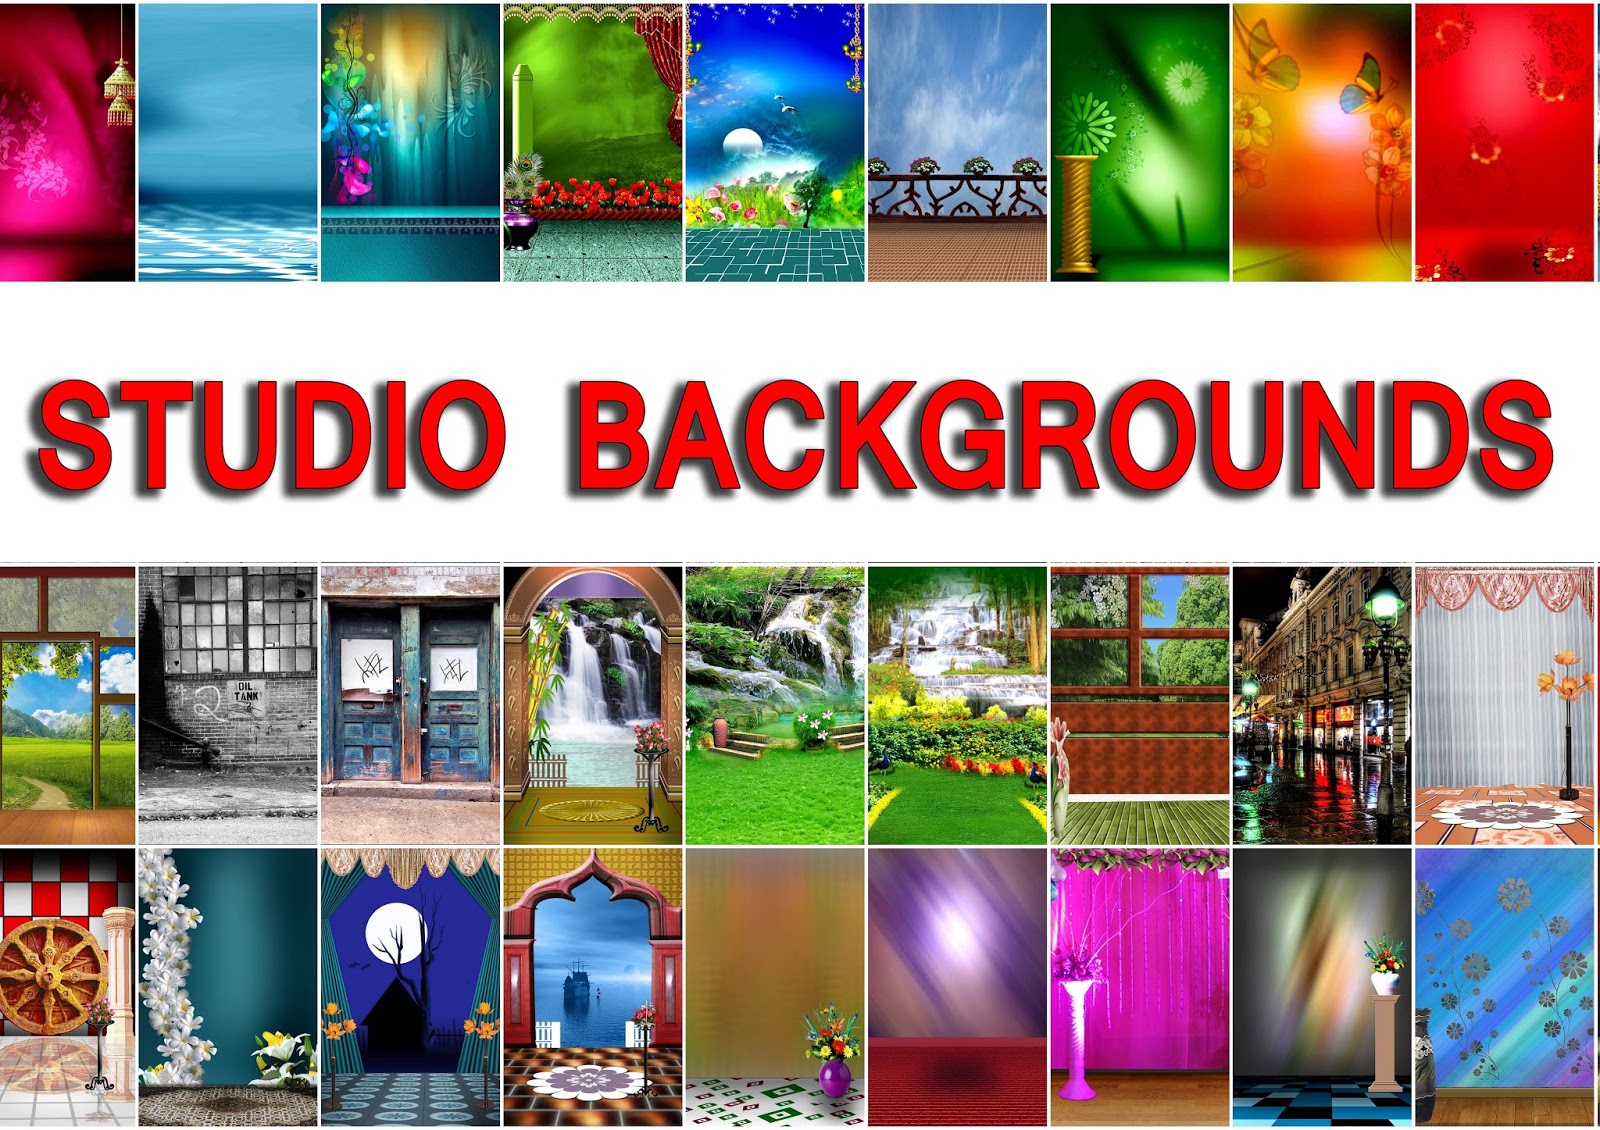 New Photo Studio Backgrounds Download Hd Studio Backgrounds For